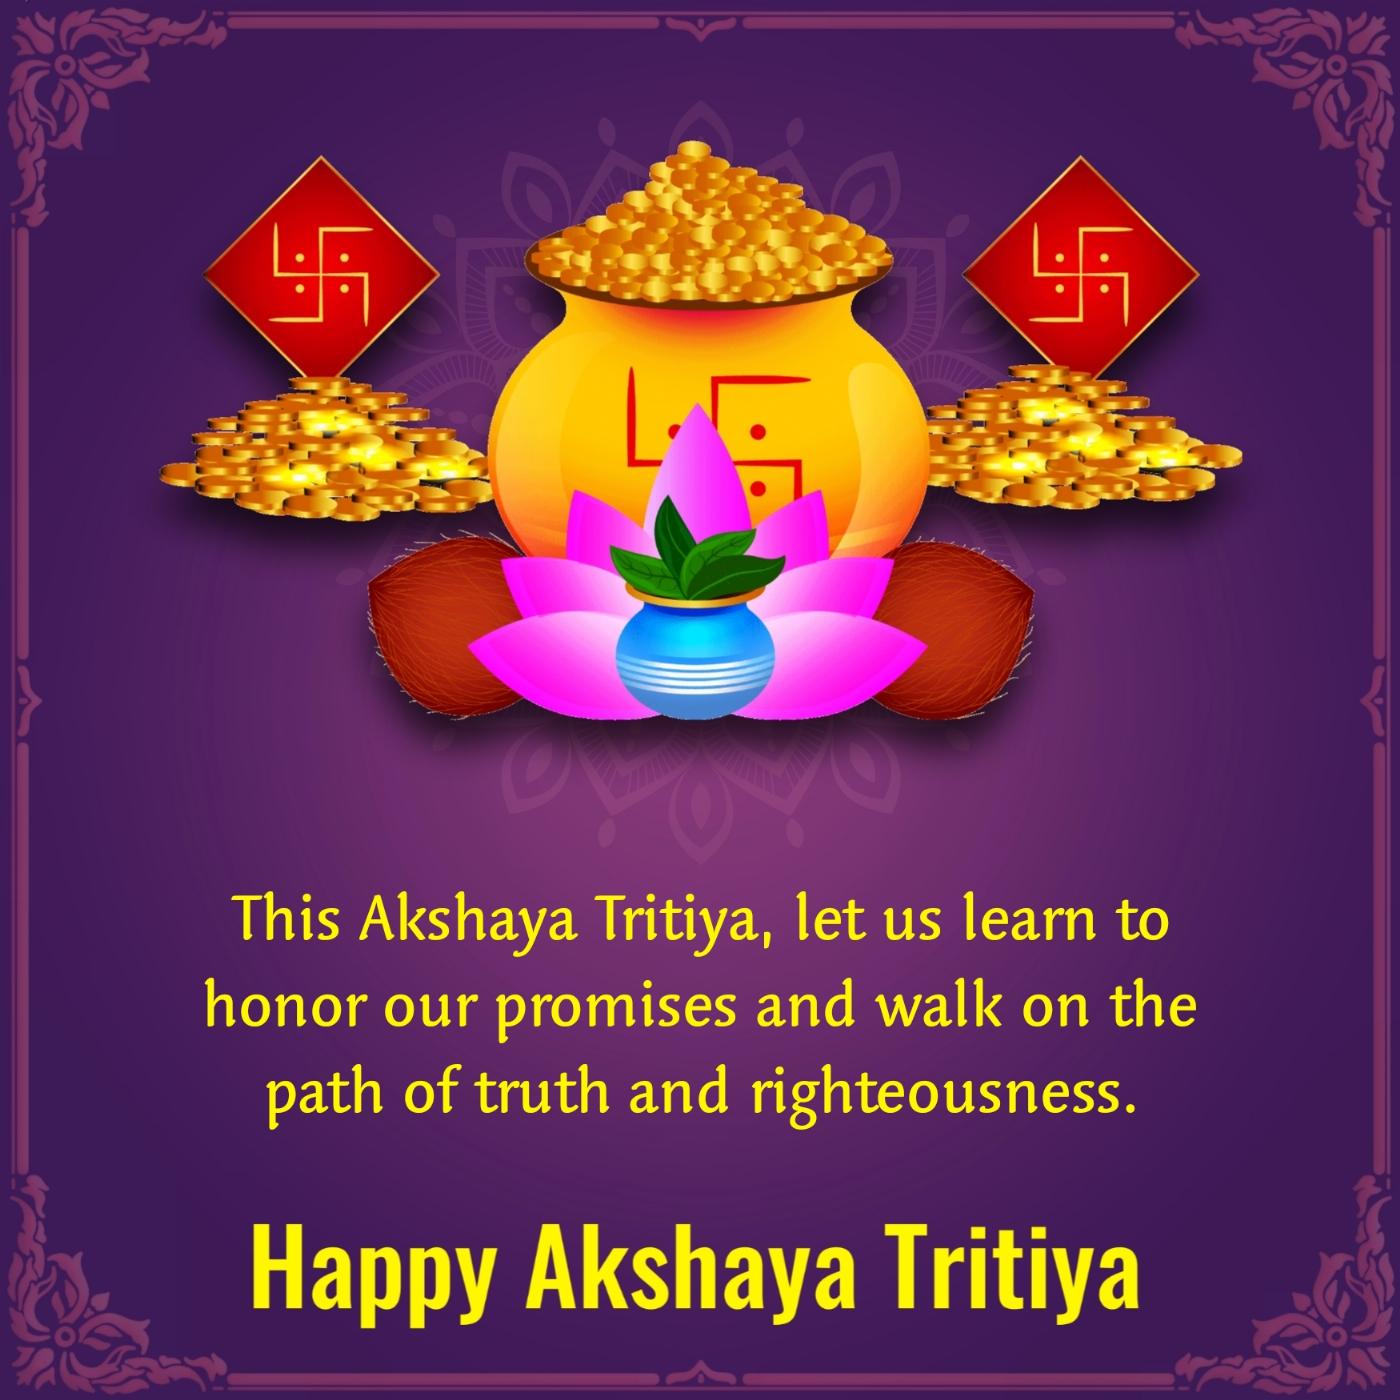 This Akshaya Tritiya let us learn to honor our promises